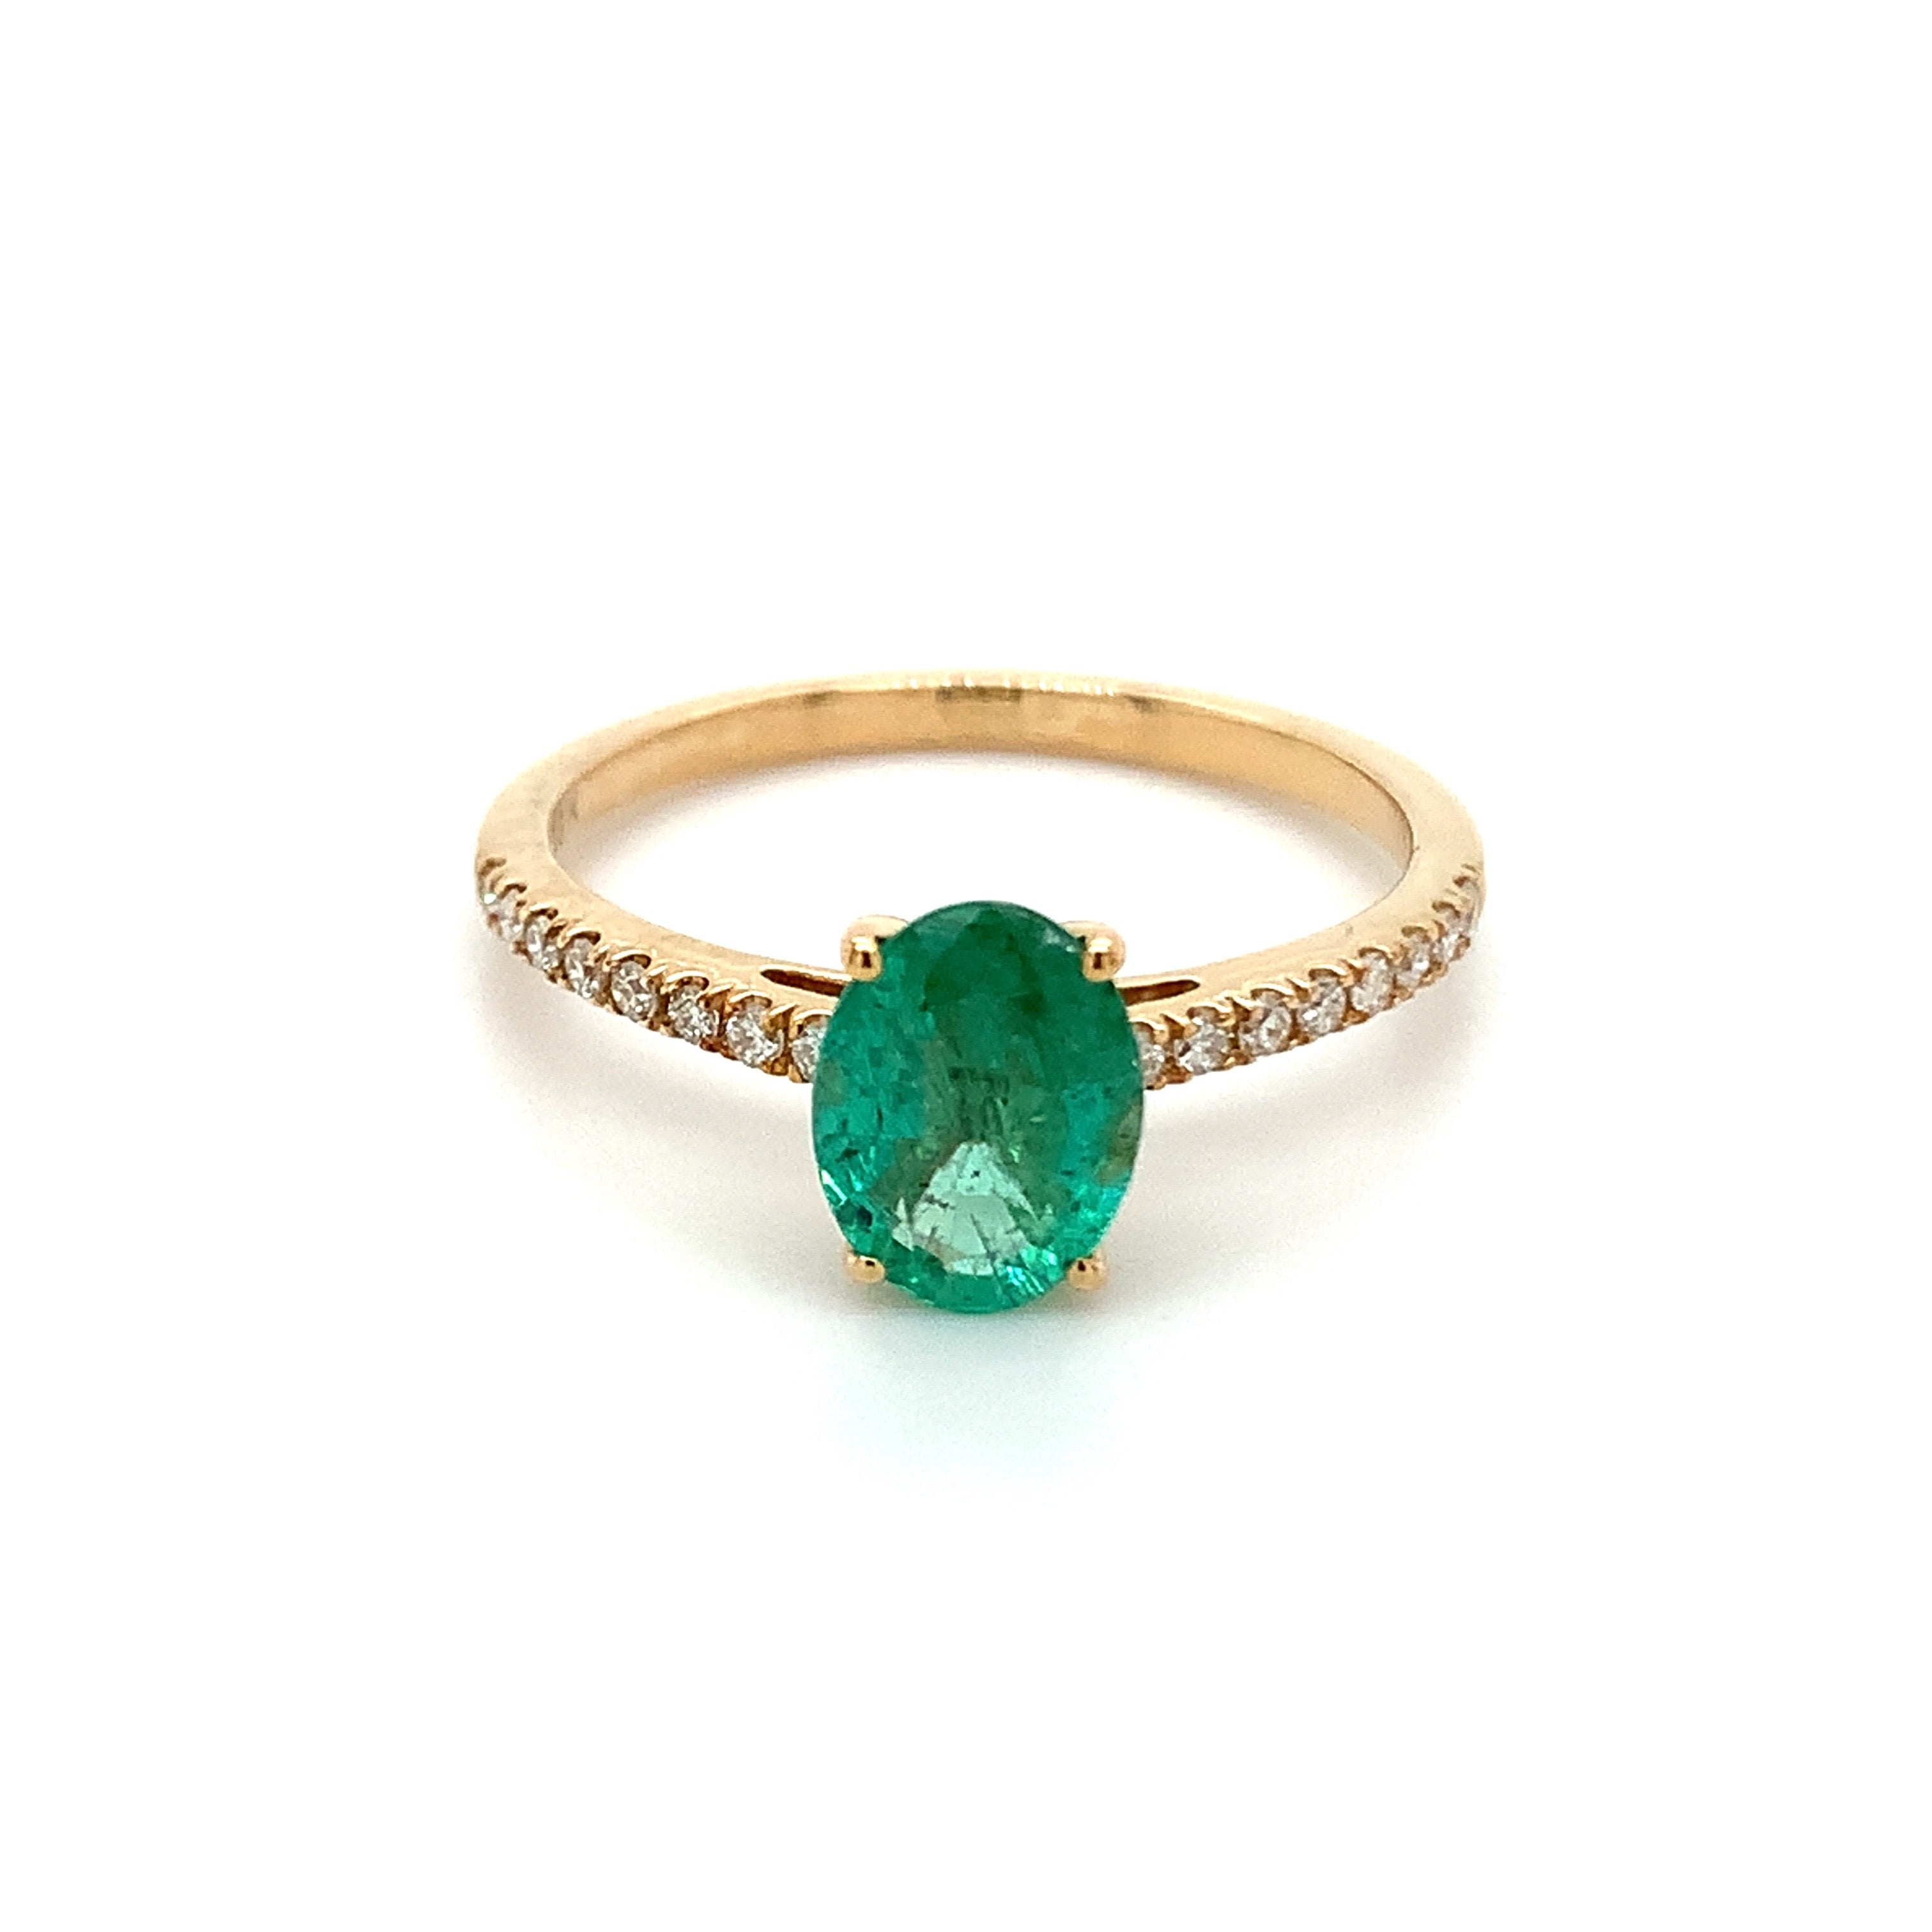 1.07ct Oval Cut Emerald Ring with Diamond in 10k Yellow Gold